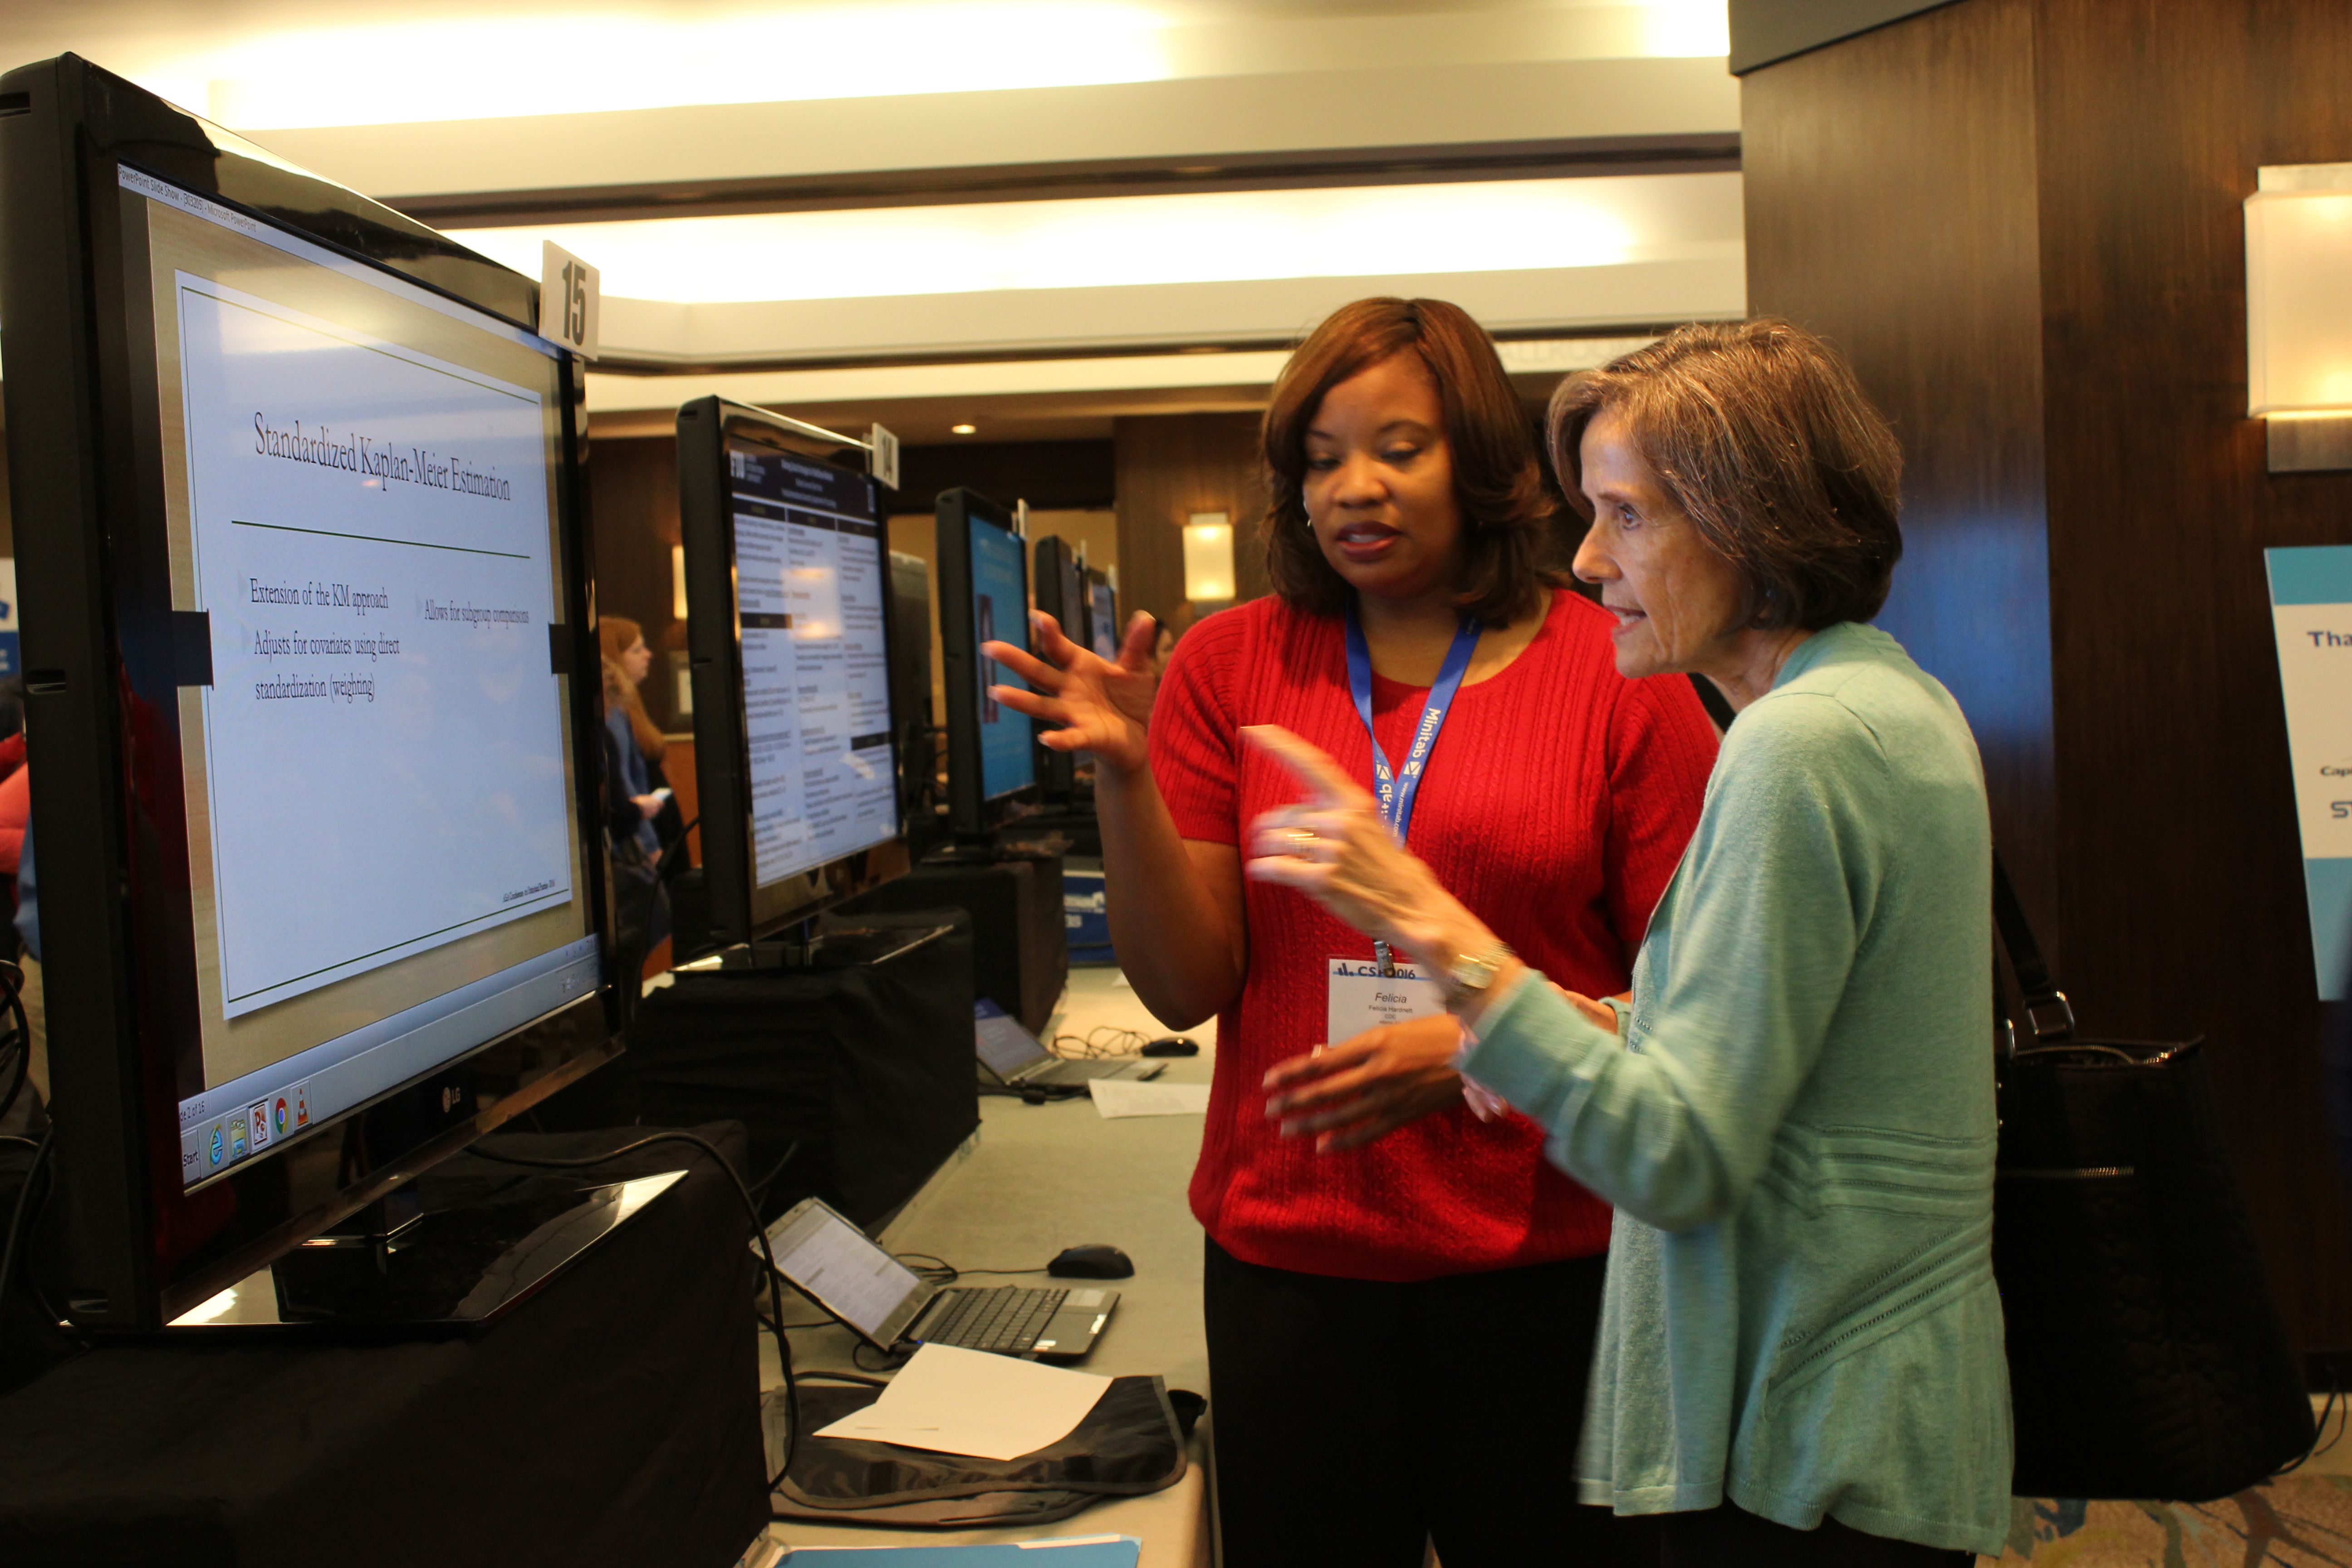 Gail Walker listens as Felicia Hardnett of the CDC discusses her poster, which focuses on three classes of statistical methods for comparing survival after AIDS diagnosis across population subgroups.